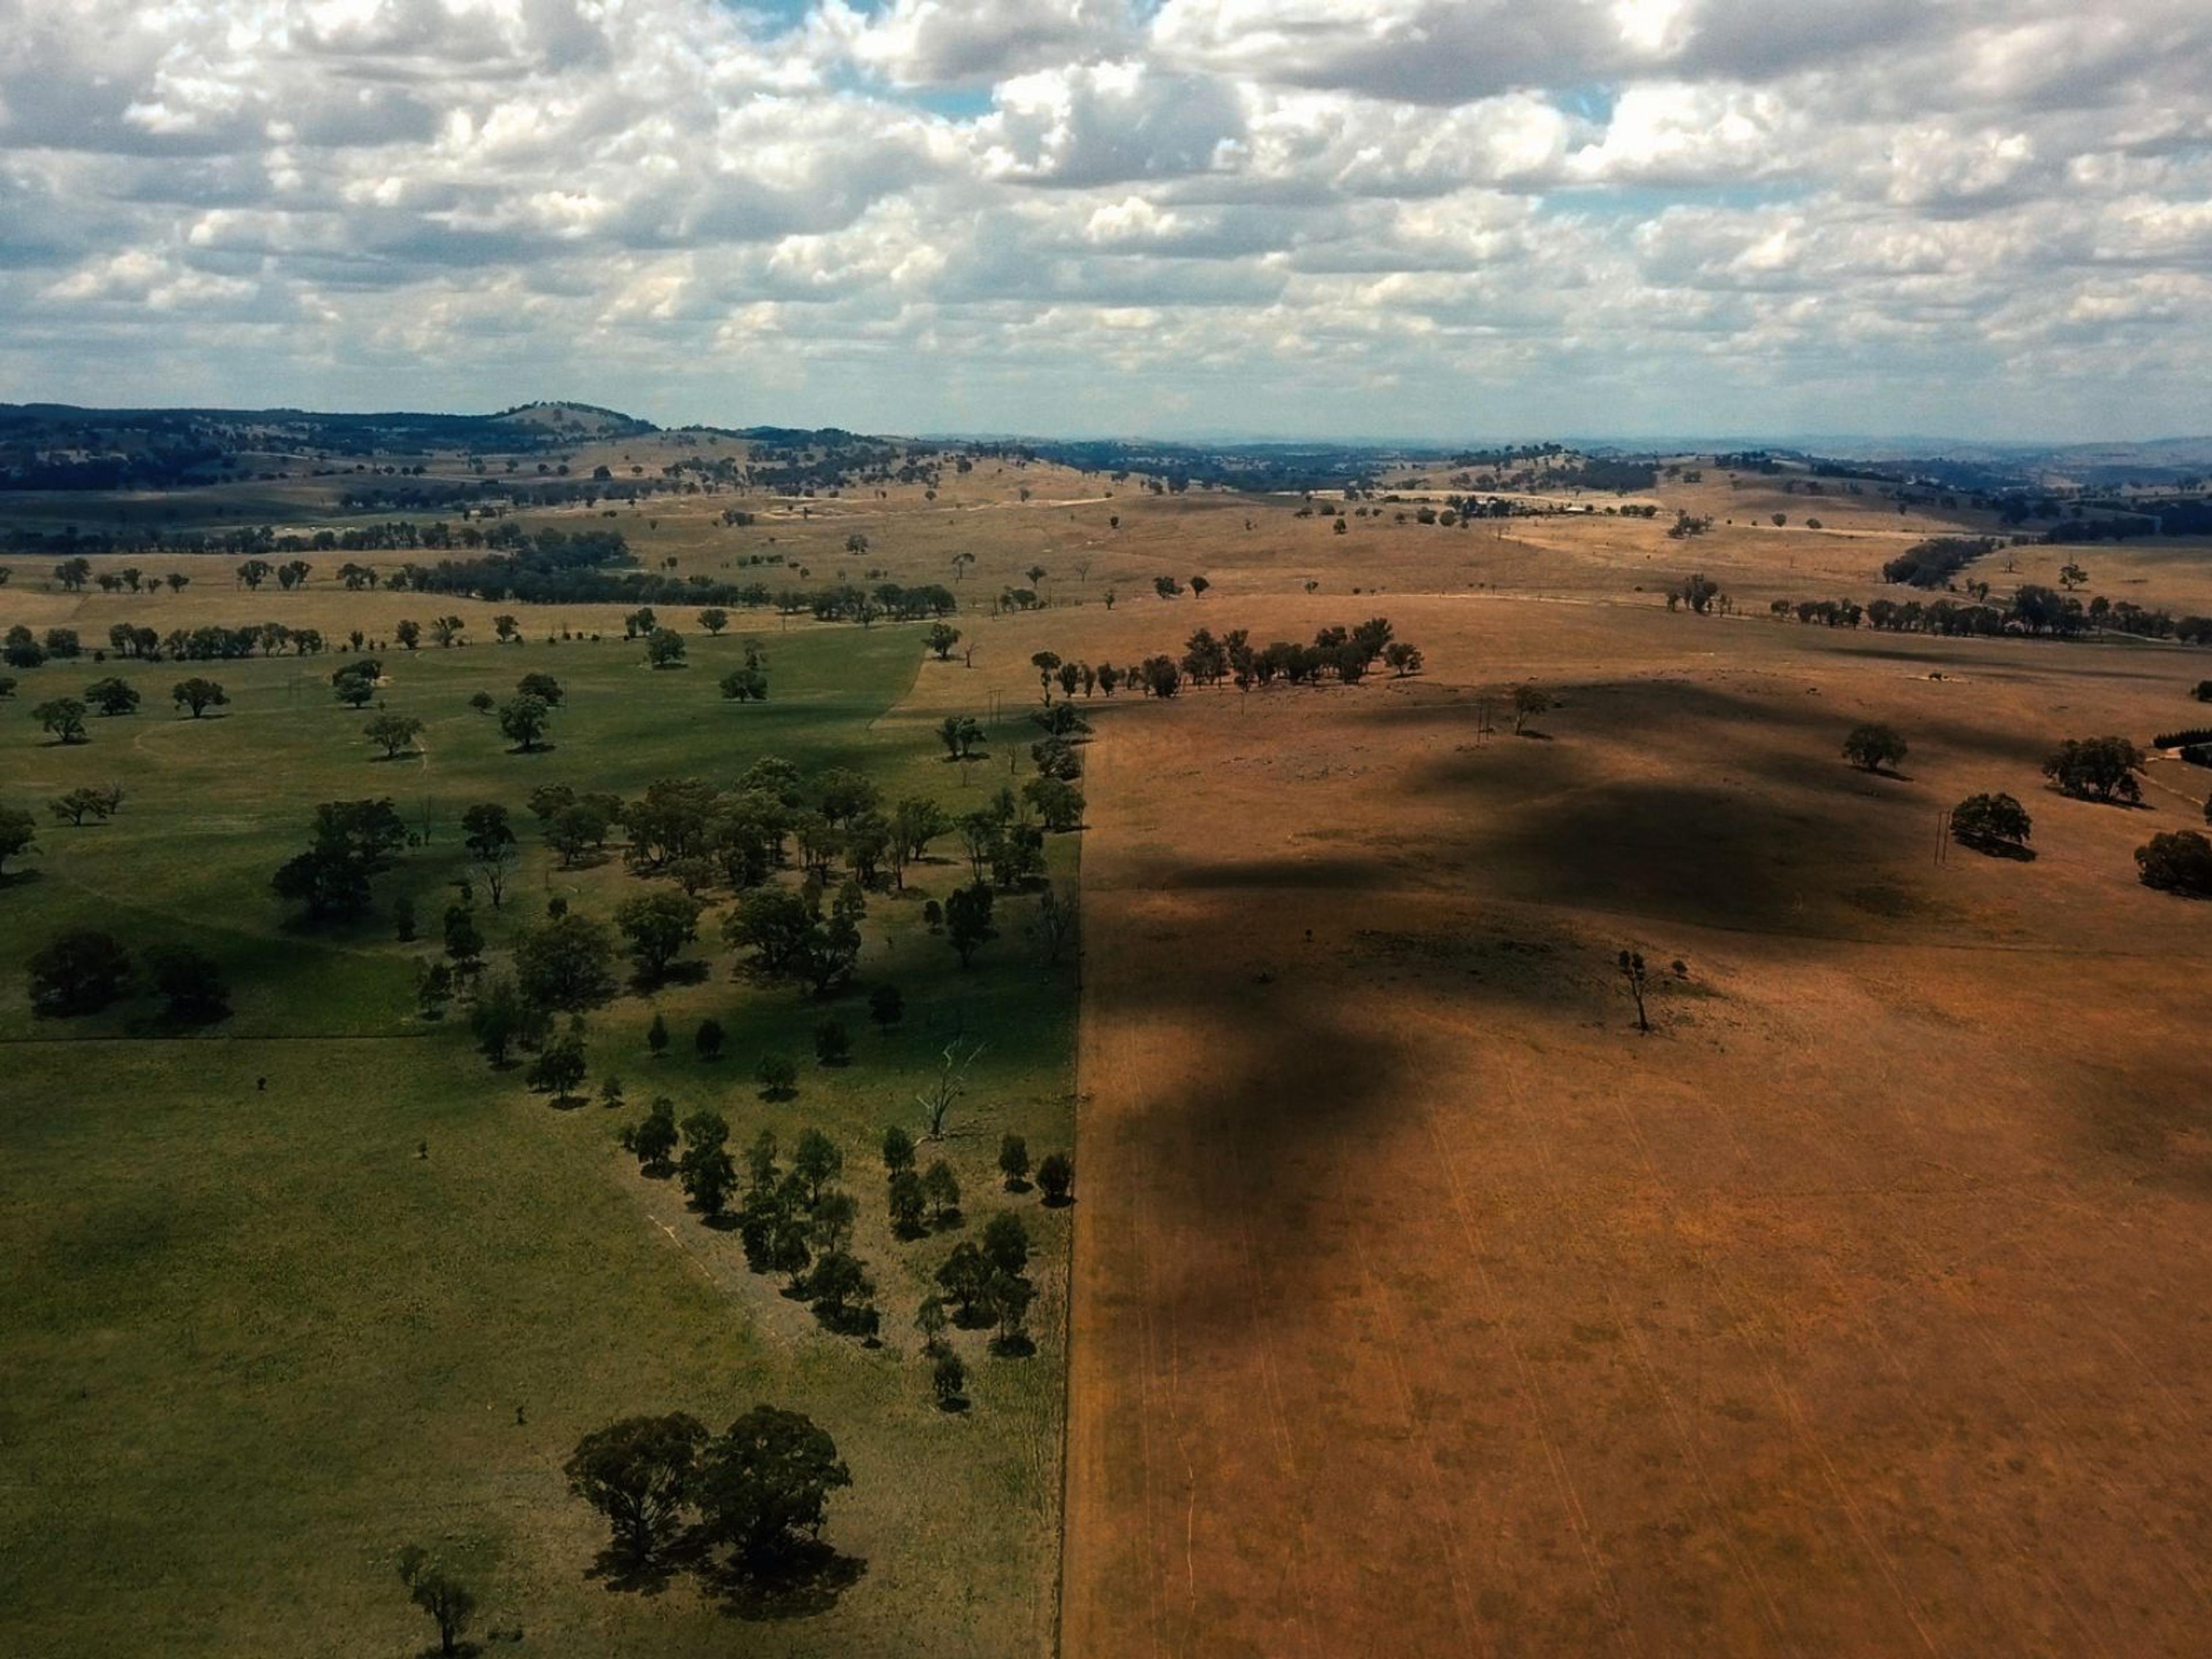 Two paddocks side by side. One is green, the other is brown.